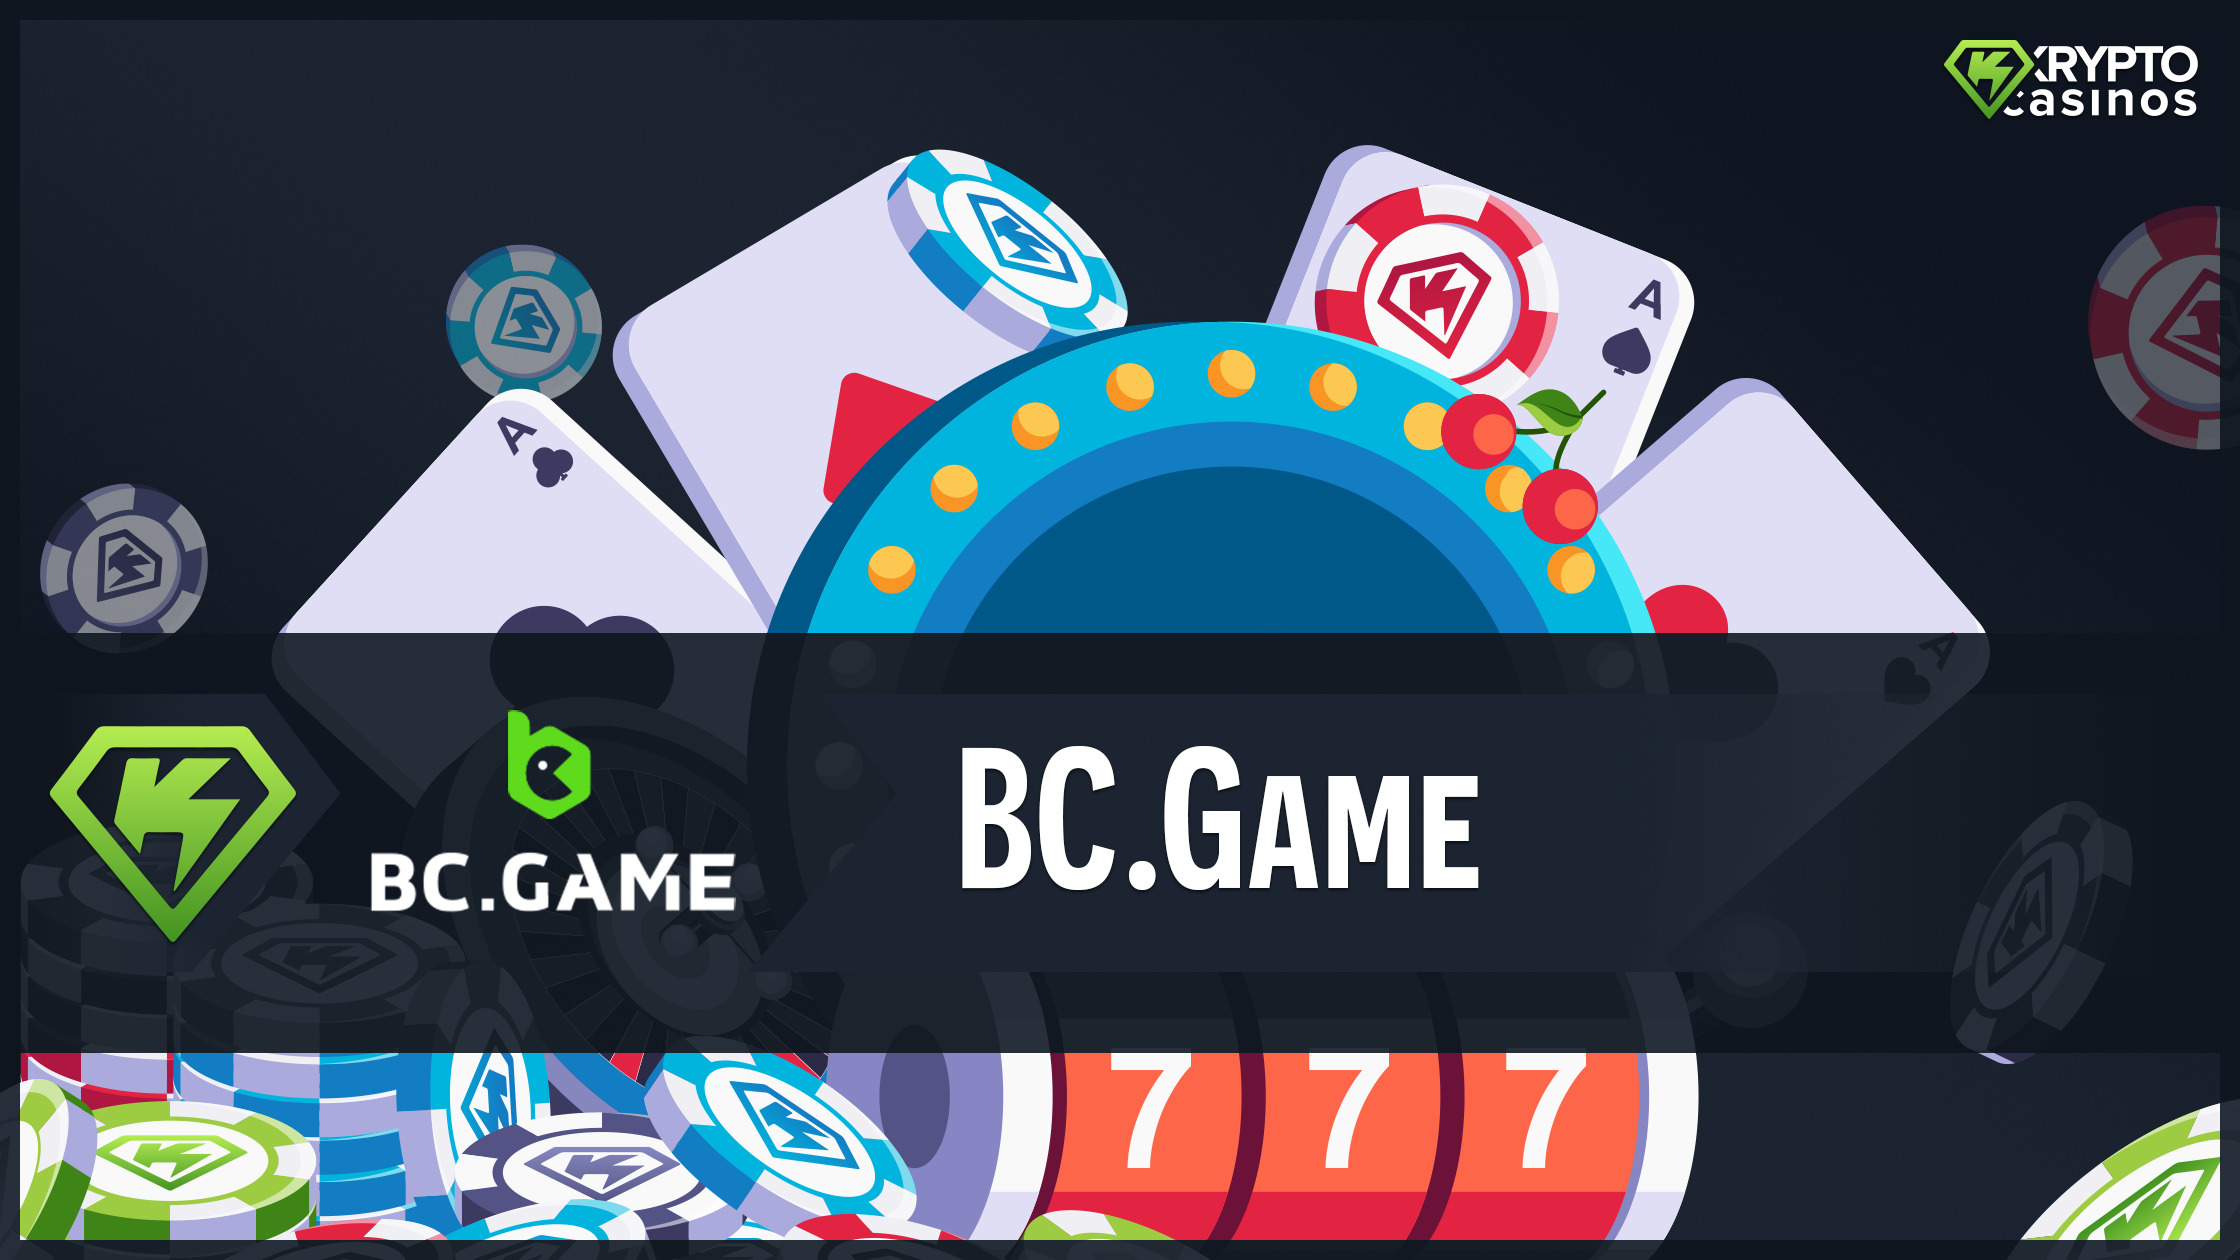 Beware The BC.Game Online Scam